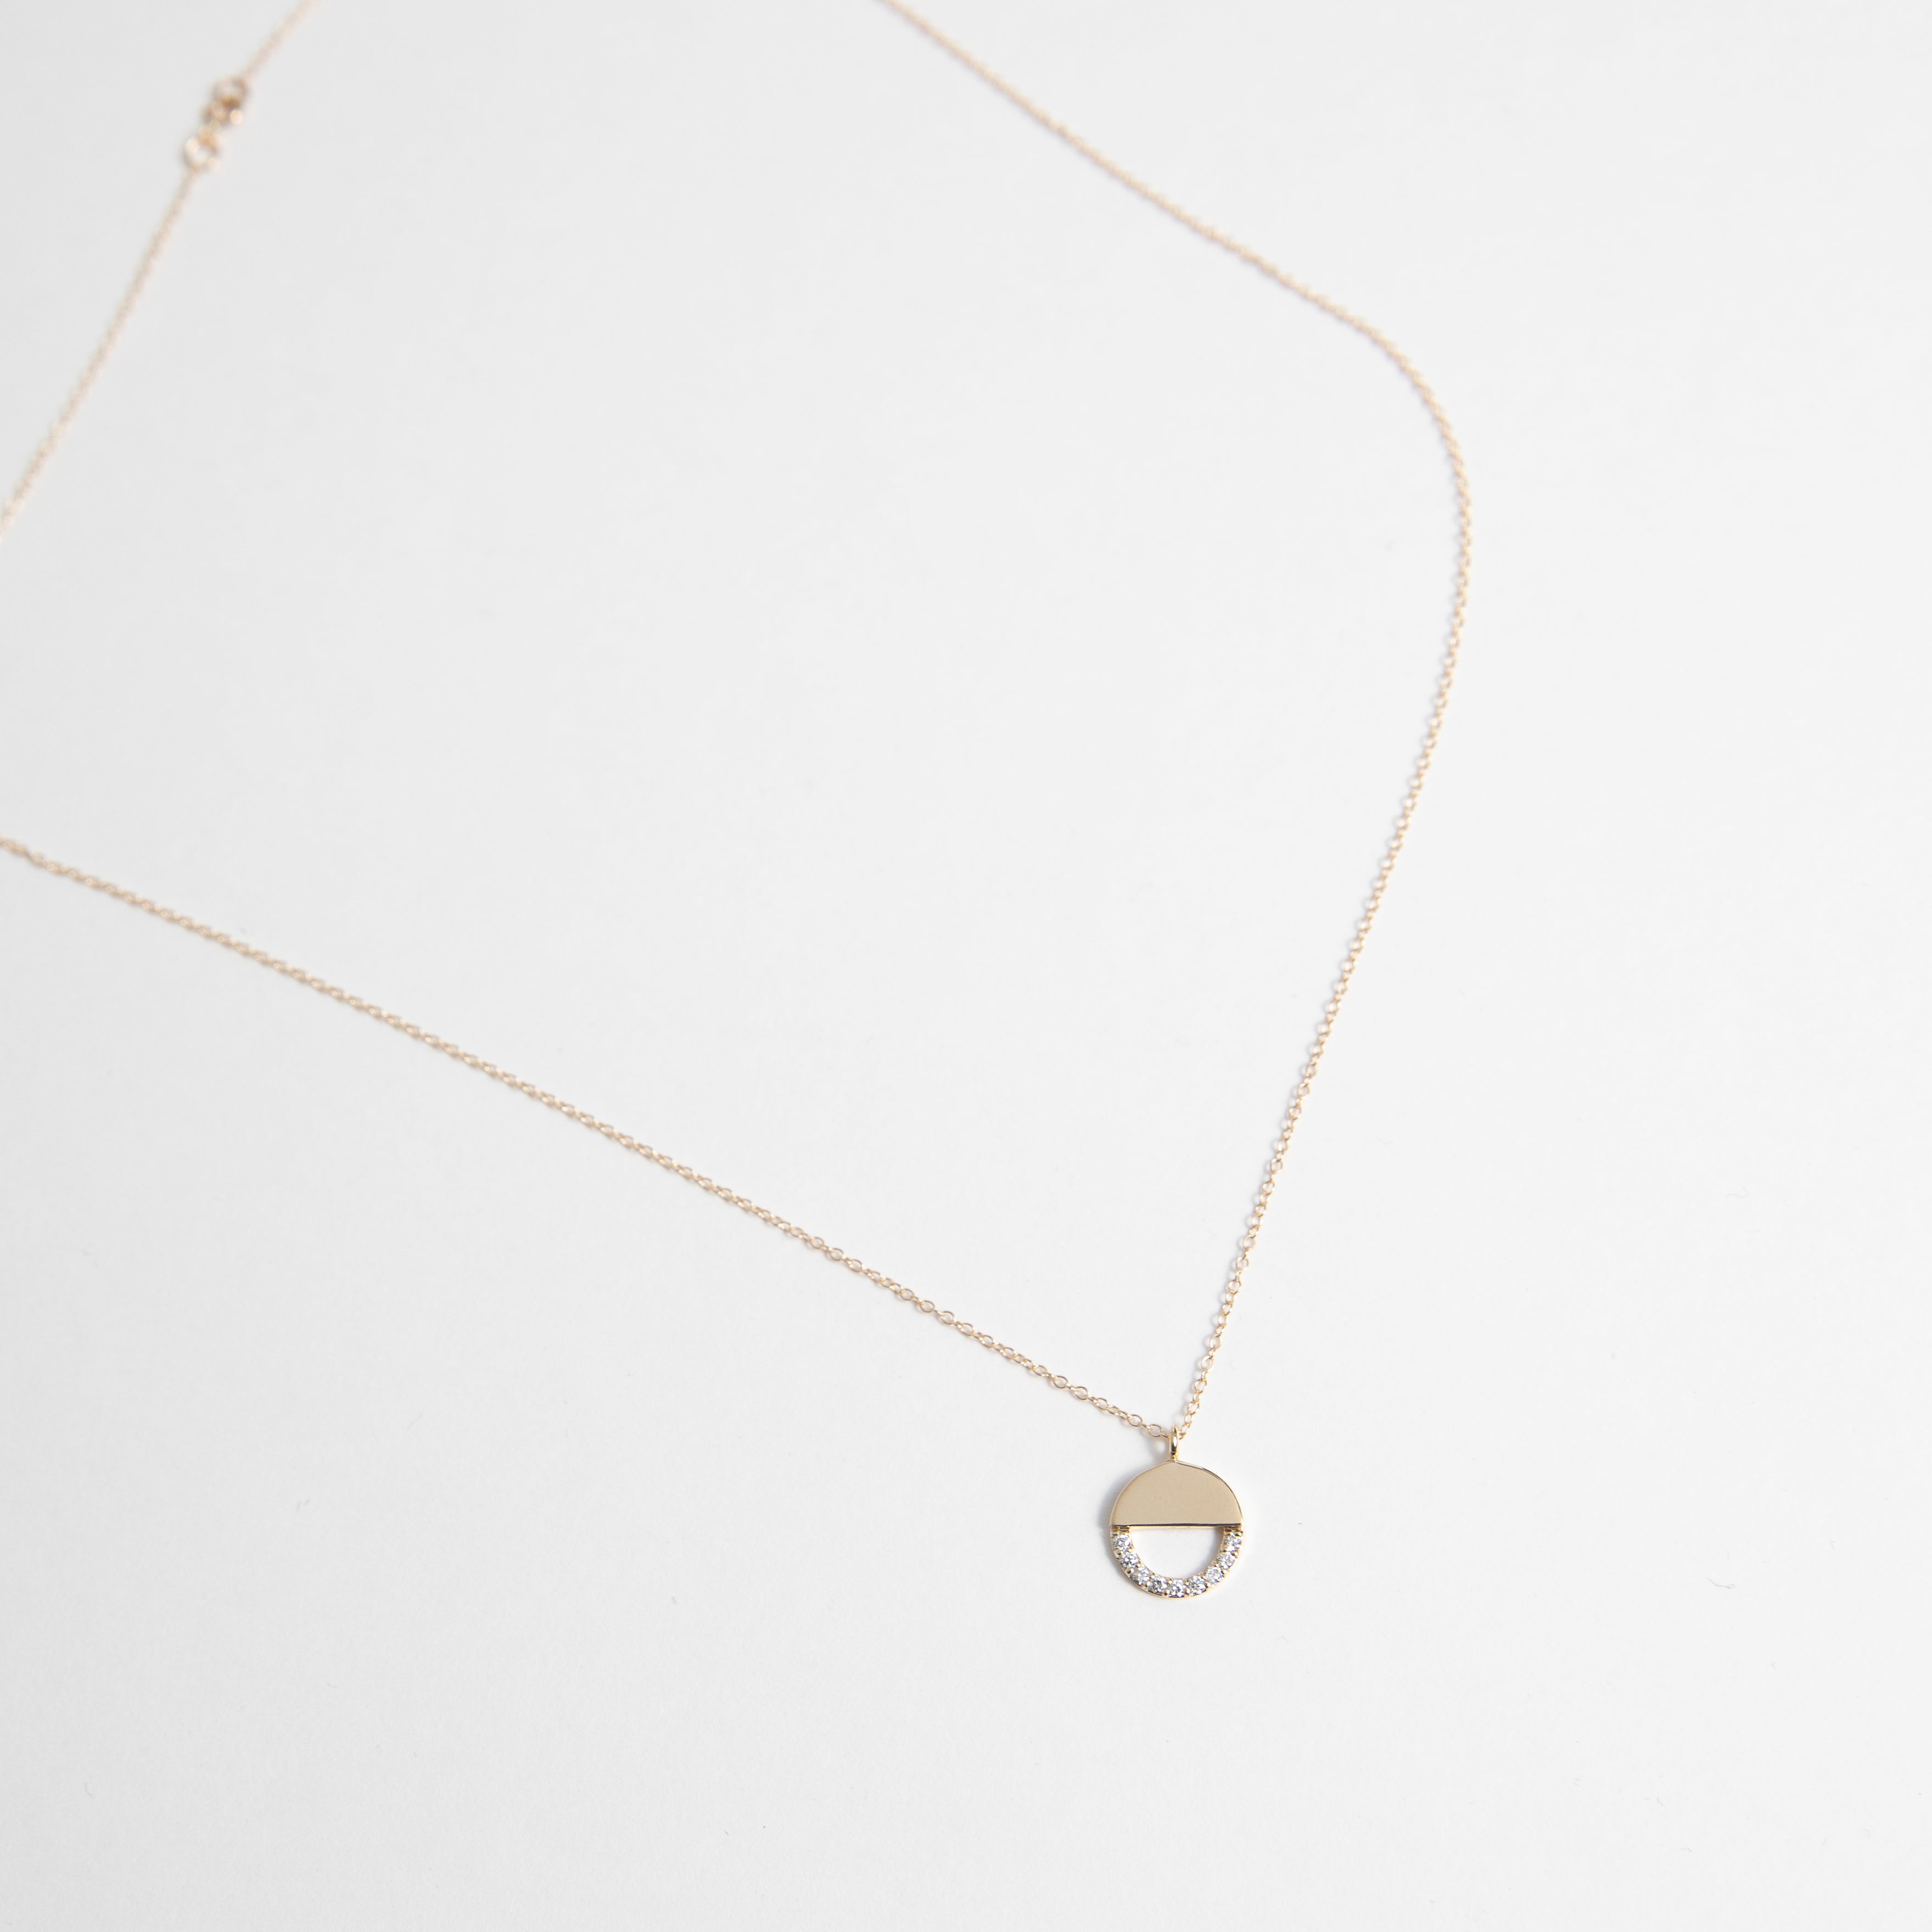 Vida Cool Necklace in 14k Gold set with White Diamonds By SHW Fine Jewelry New York City